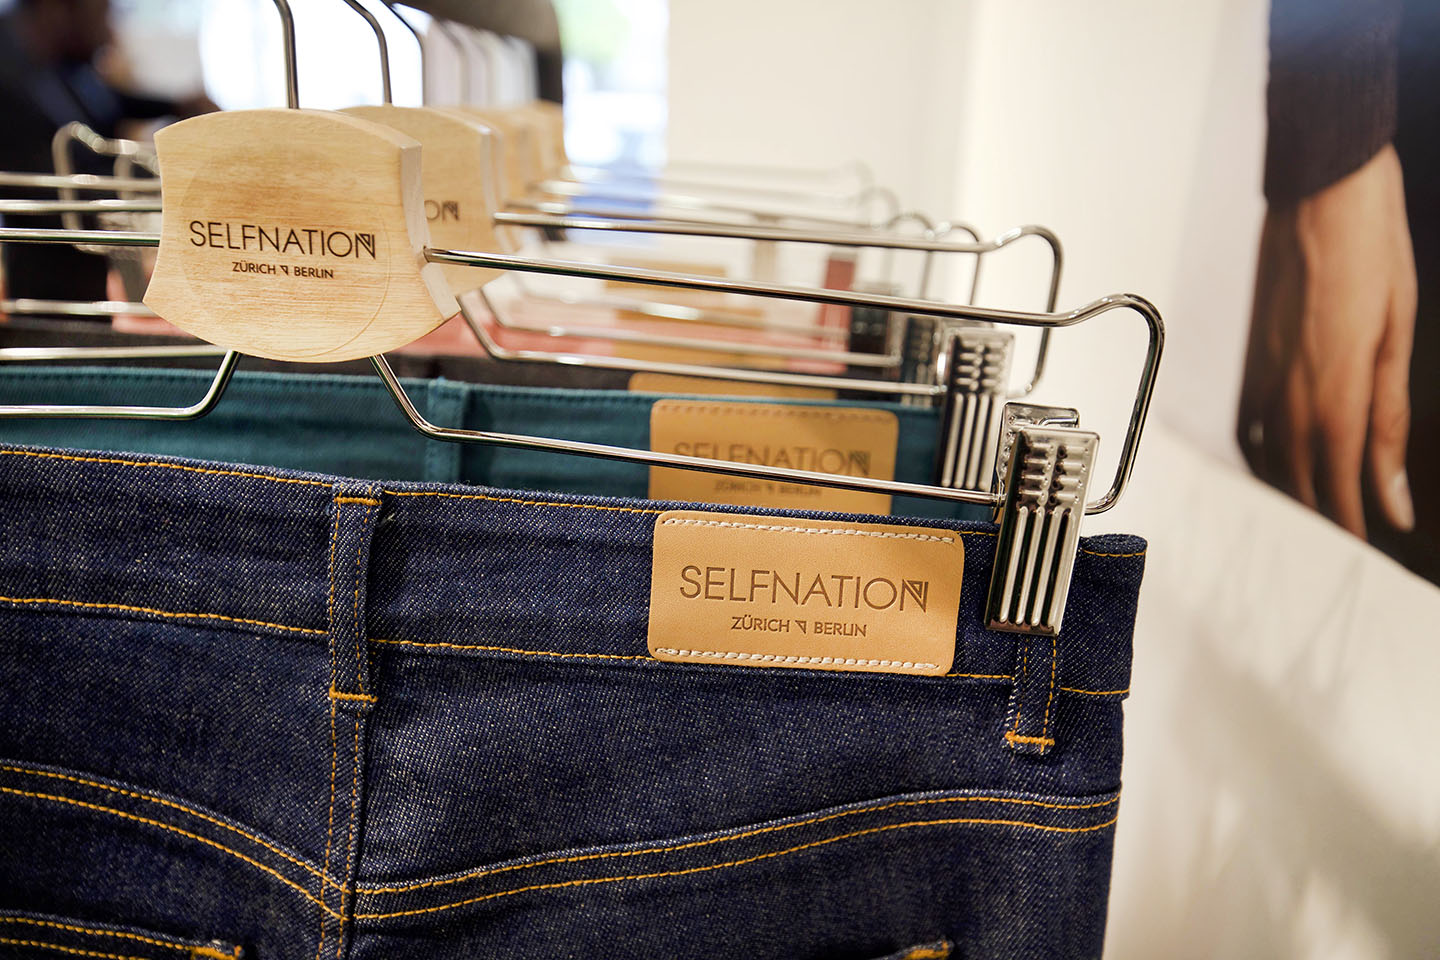 Selfnation pop-up store london